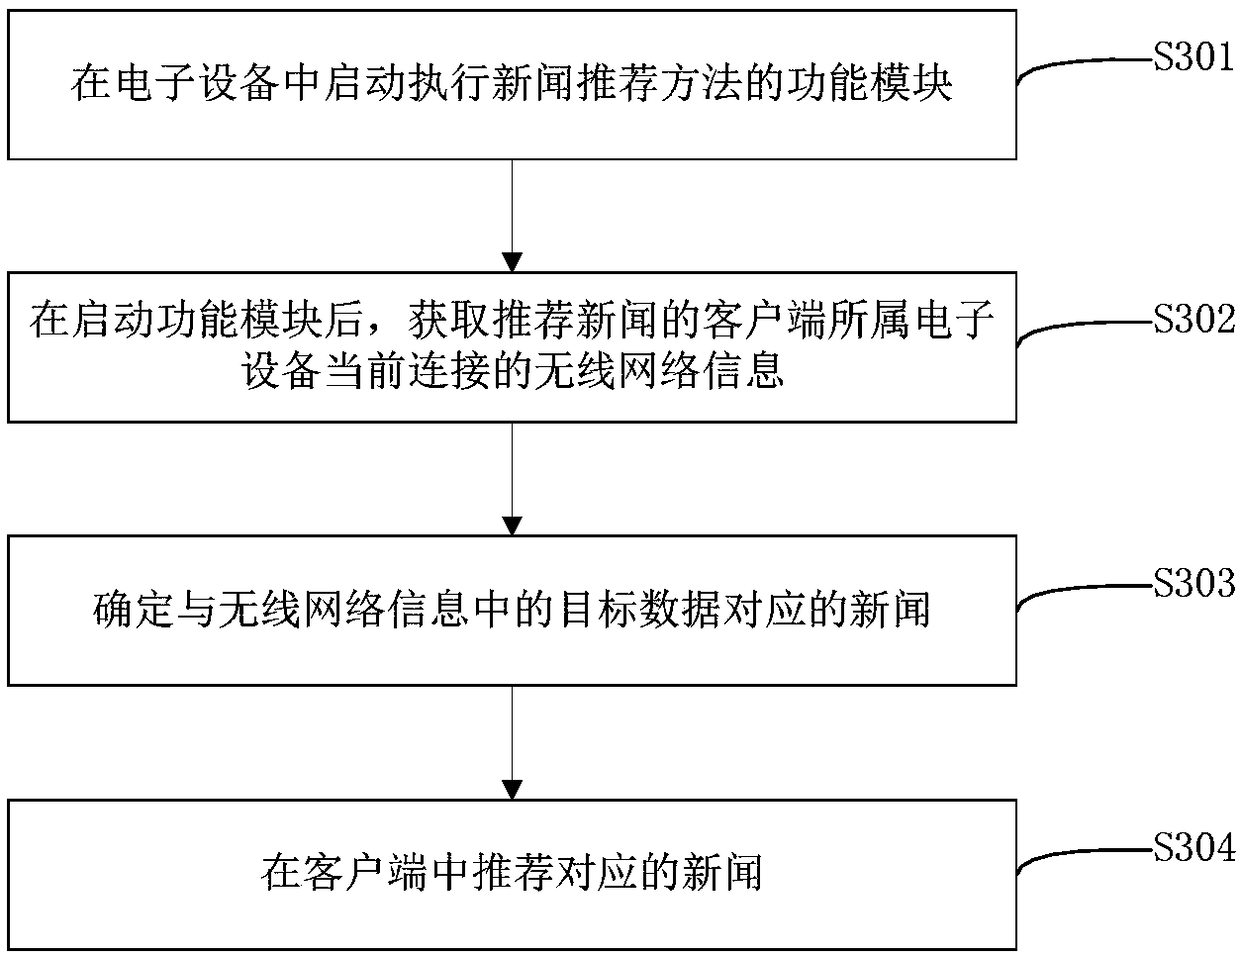 News recommendation method and device